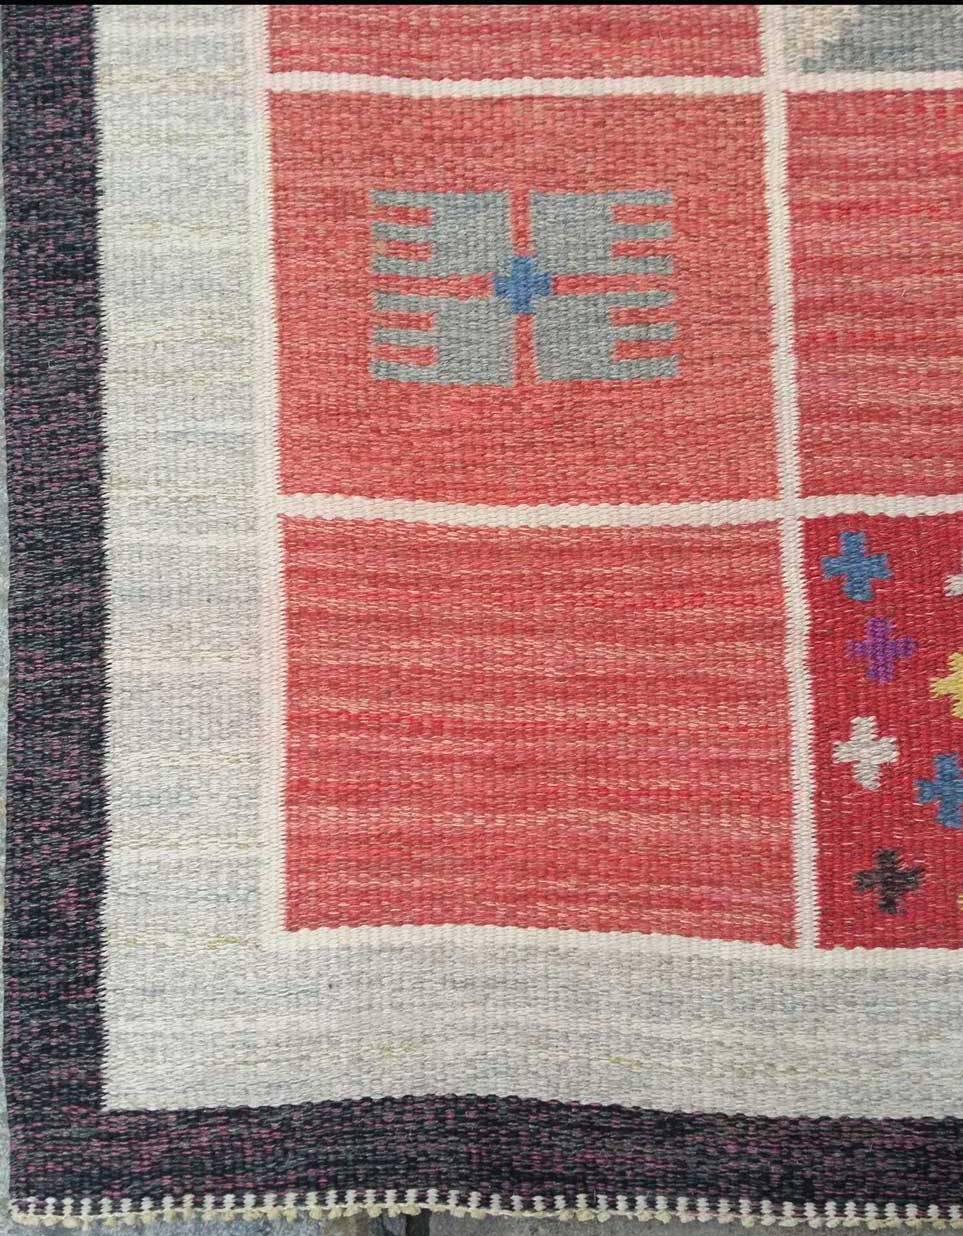 Swedish flat-woven rölakan rug. Chequered designed. Signed: RC = Rakel Carlander. RC had her workshop in Skövde (W. Sweden). Warp: light beige linen. Patterning weft: wool. Good condition: Good, very minor renovation, invisibly stopped ends, cleaned.